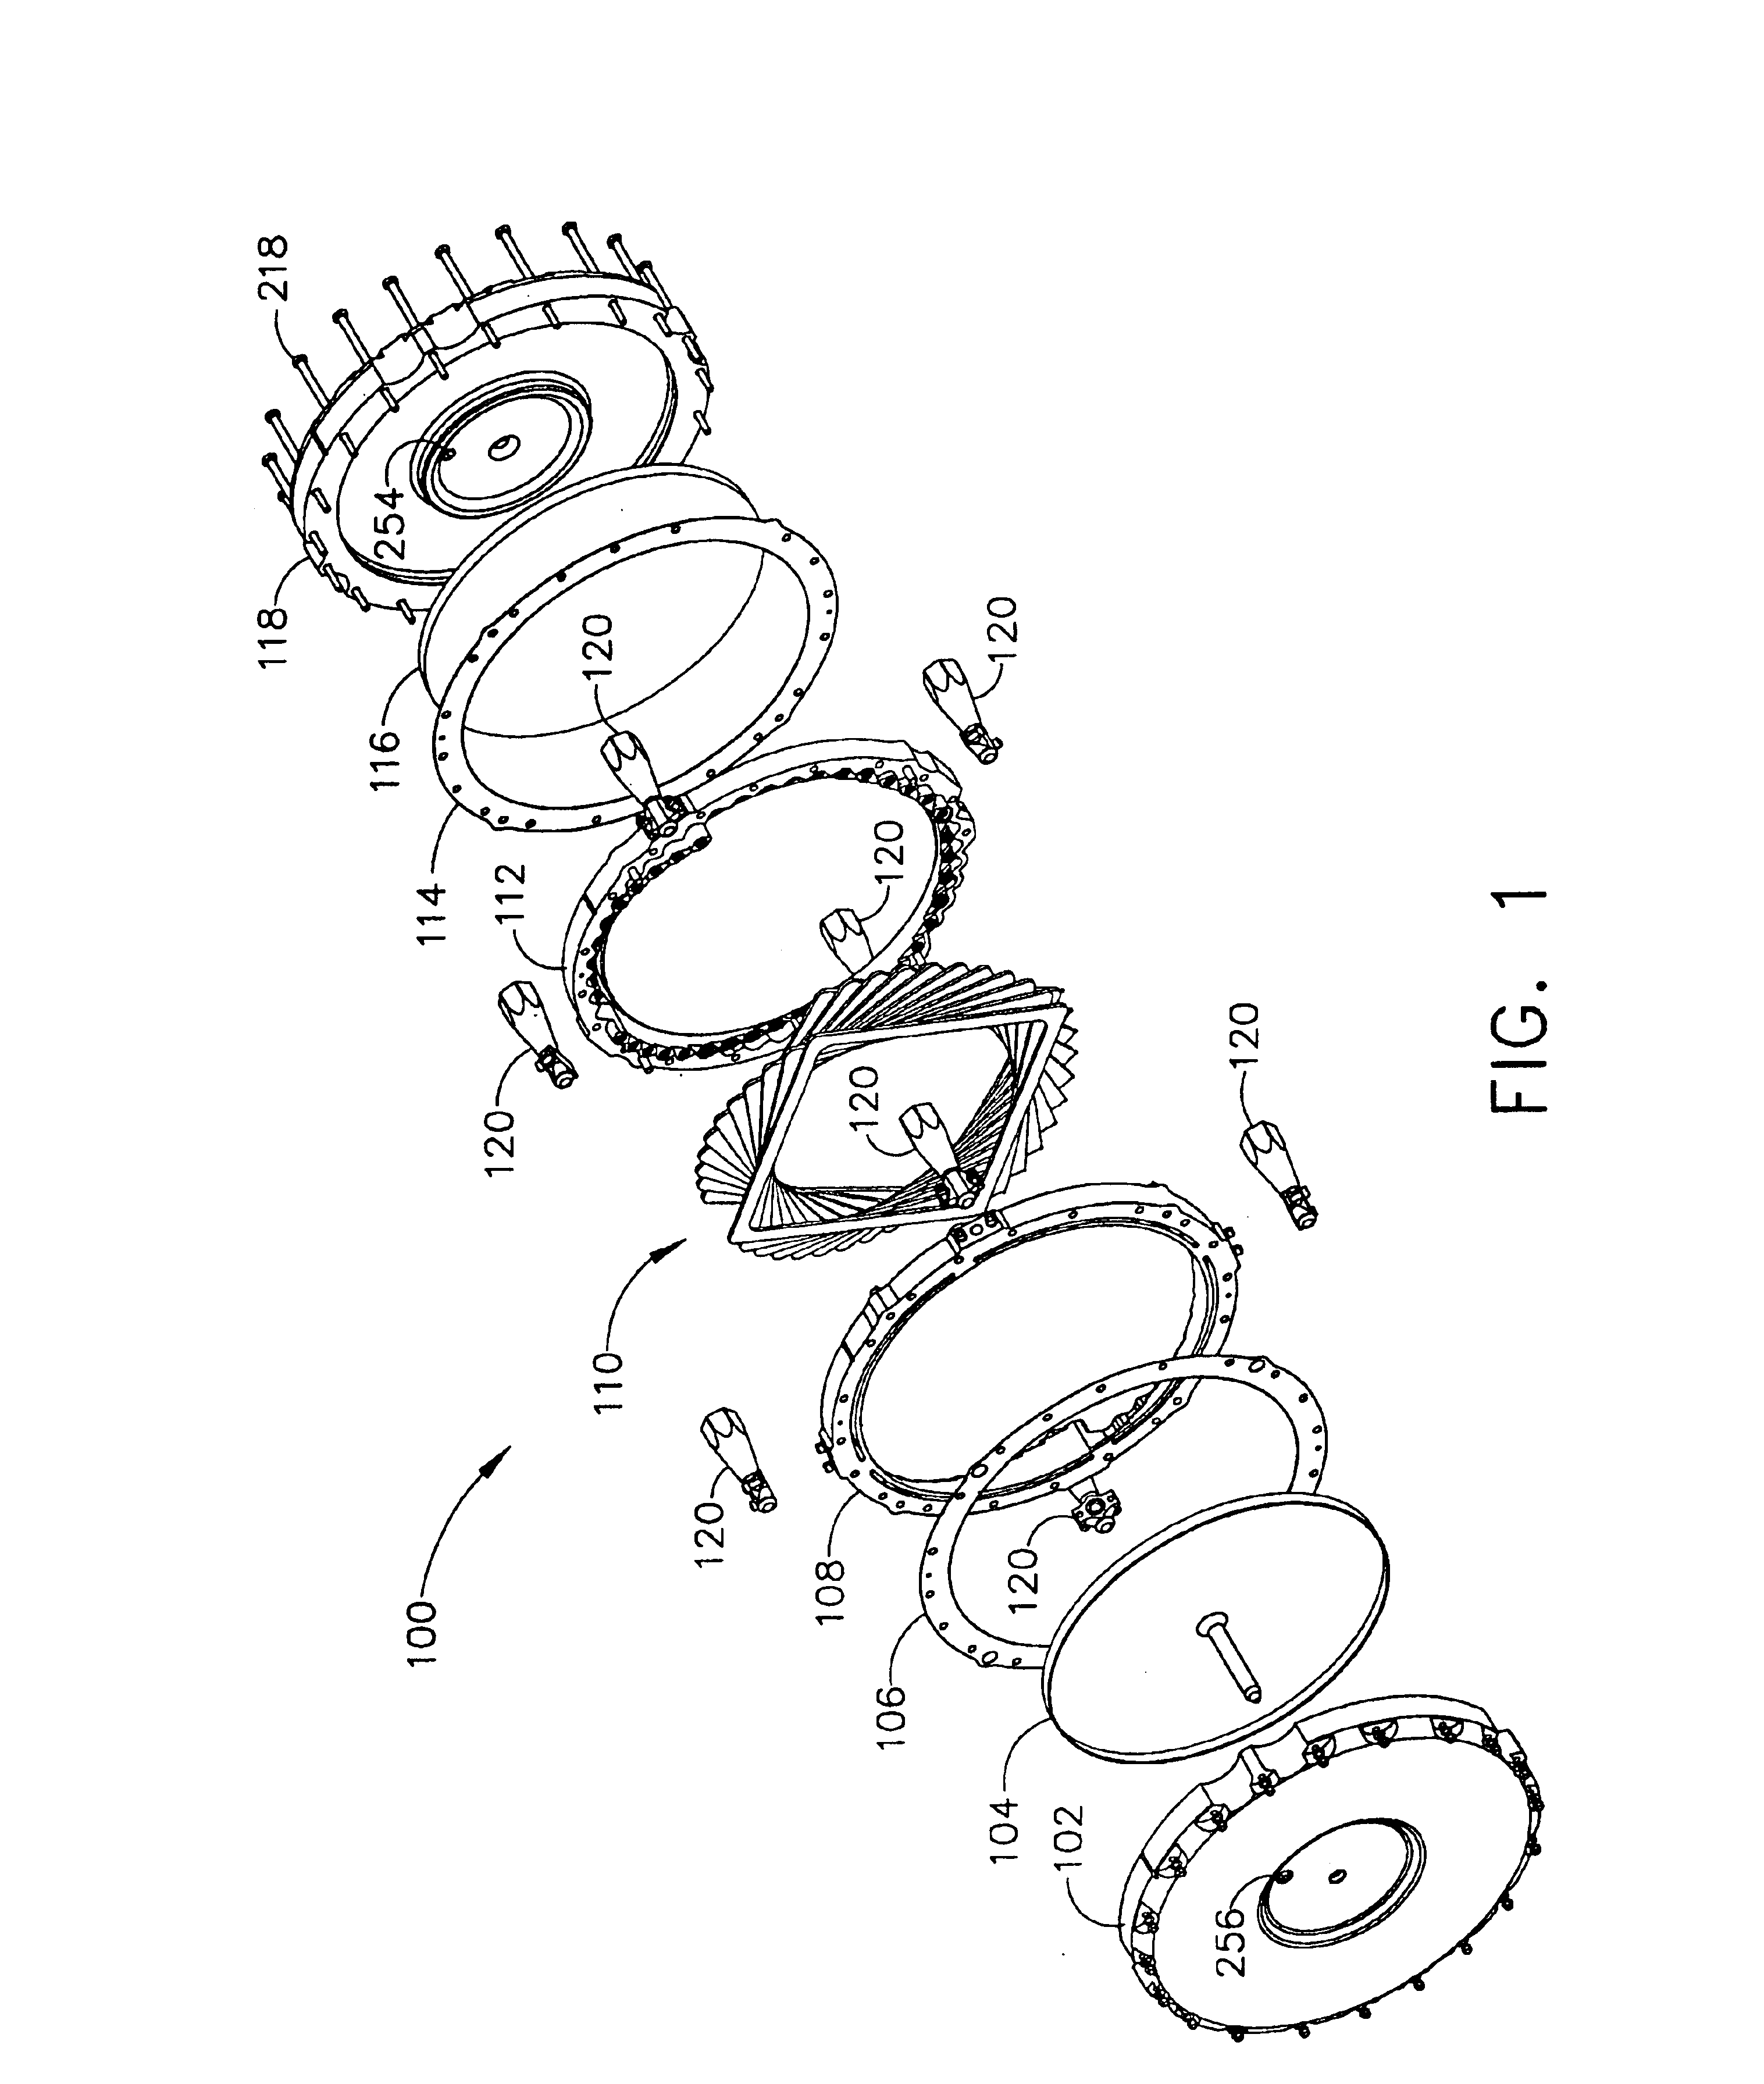 Method and apparatus for fuel cell packaging